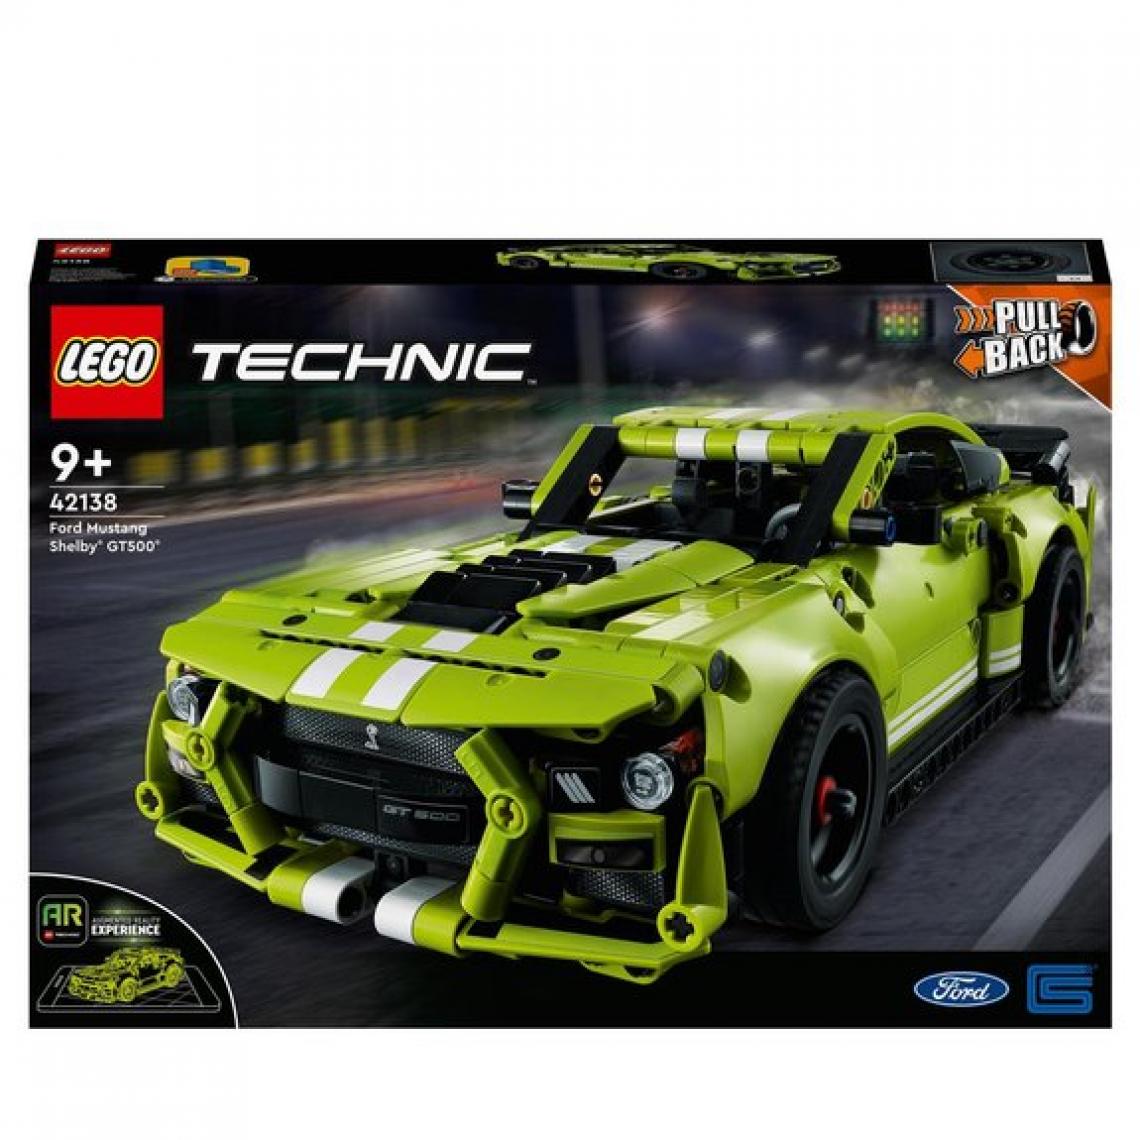 Ludendo - Ford Mustang Shelby® GT500® LEGO Technic 42138 - Briques et blocs